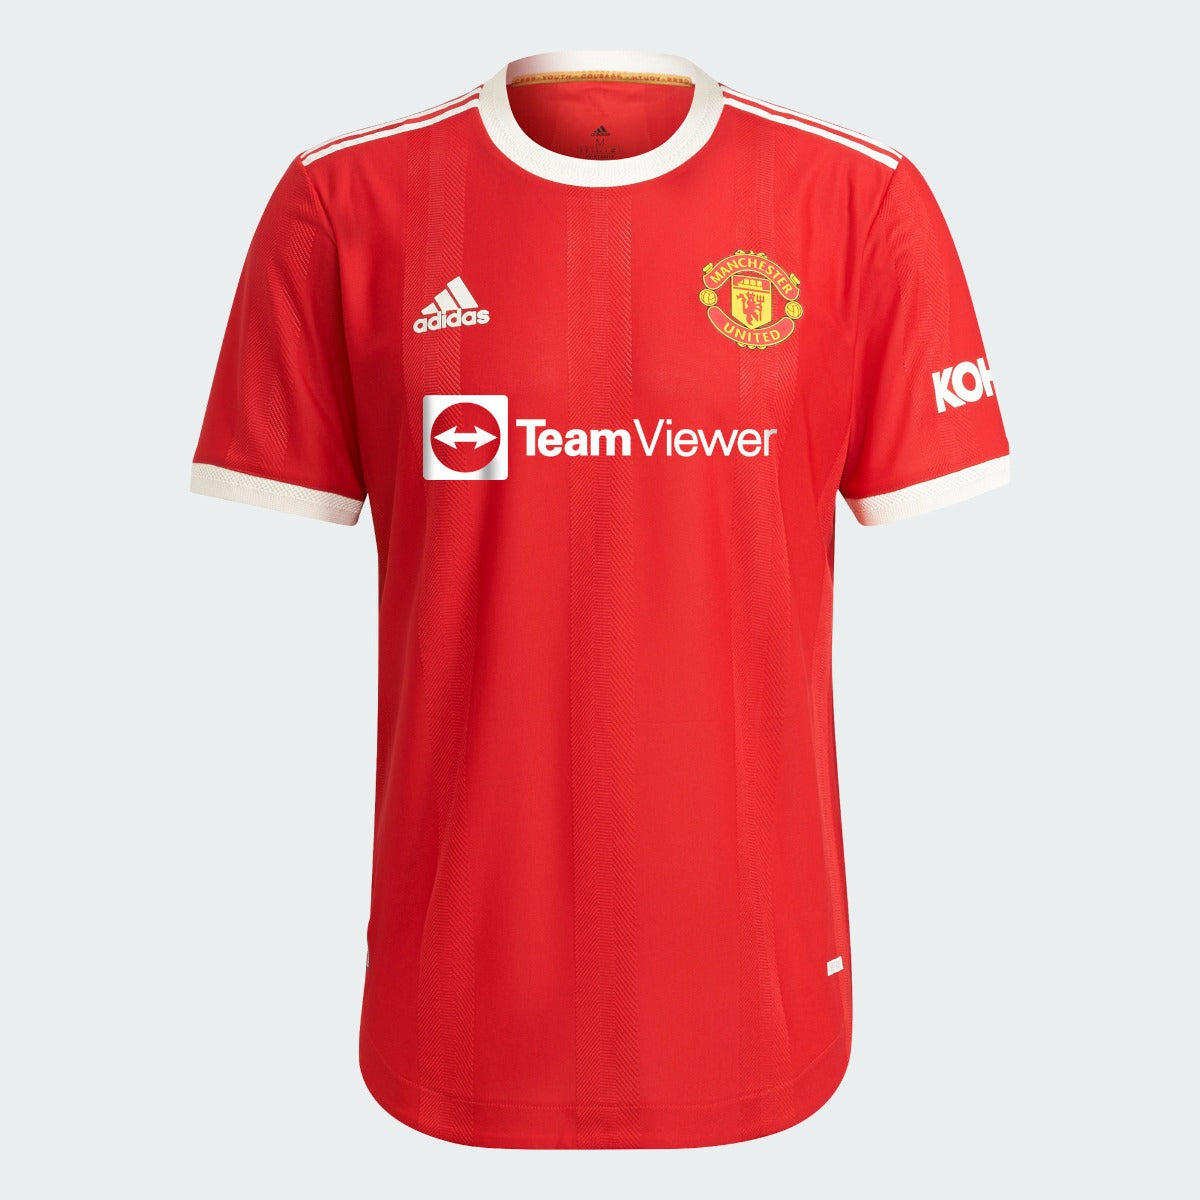 Adidas 2021-22 Manchester United Authentic Home jersey - Red-White (Front)